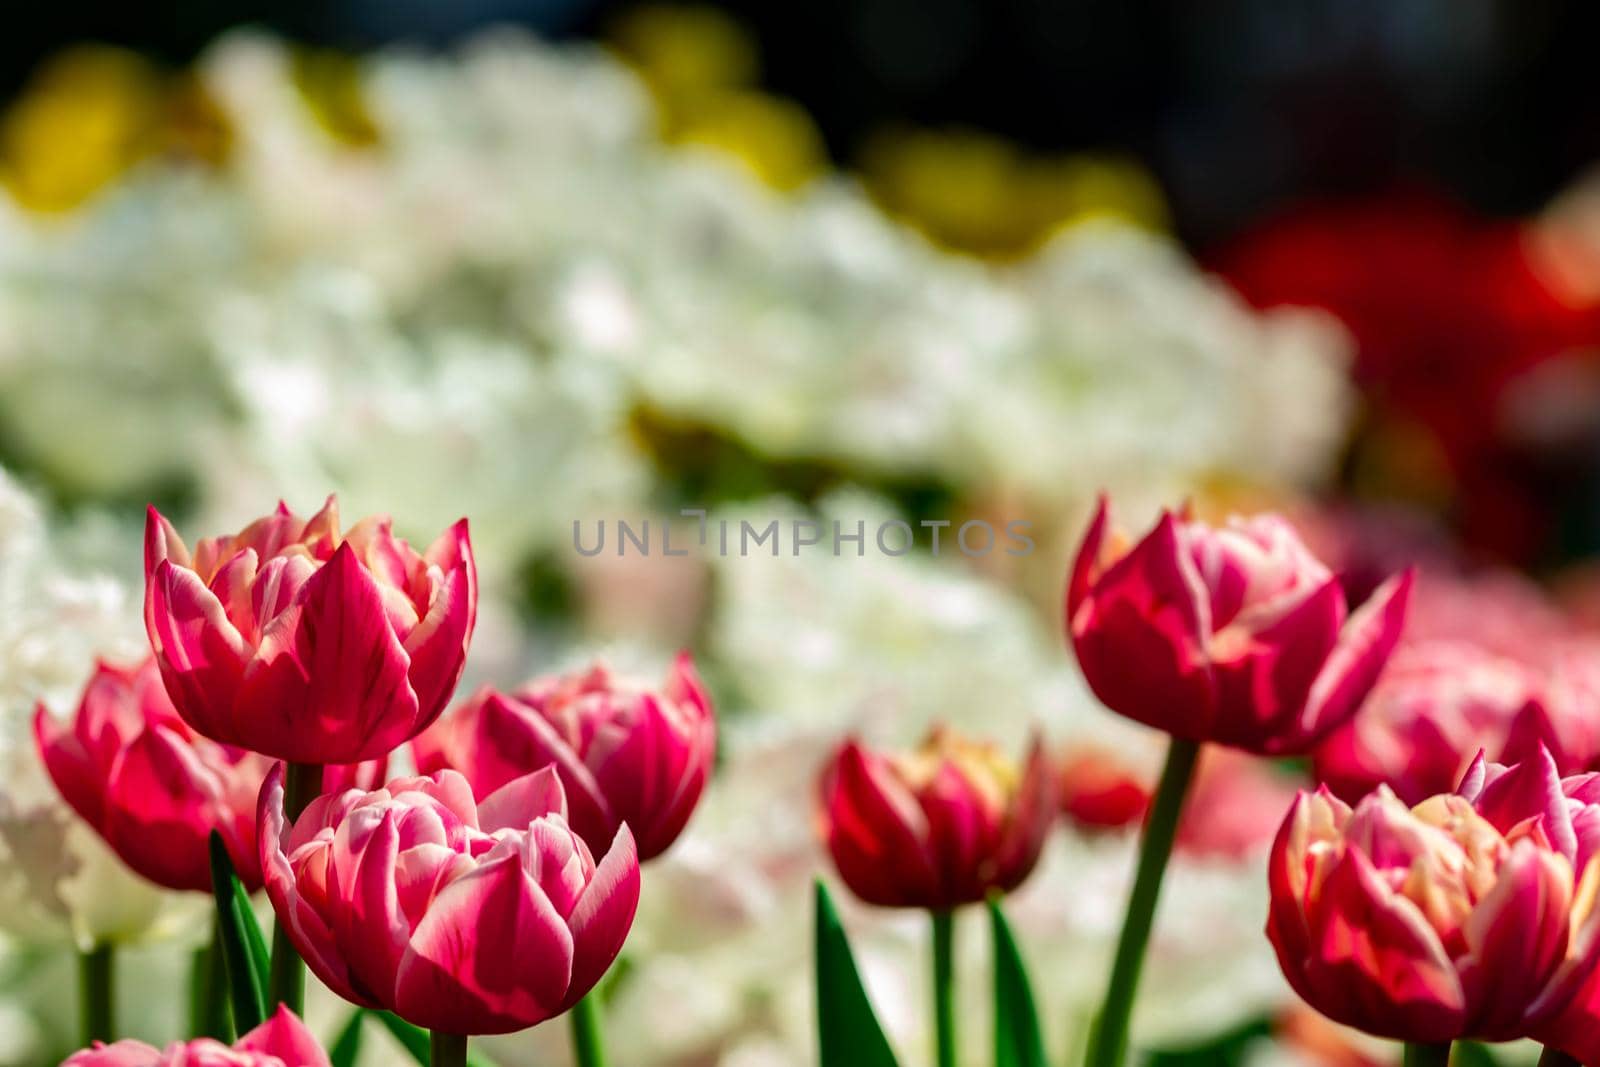 Red and white flowers with a blurry background by billroque